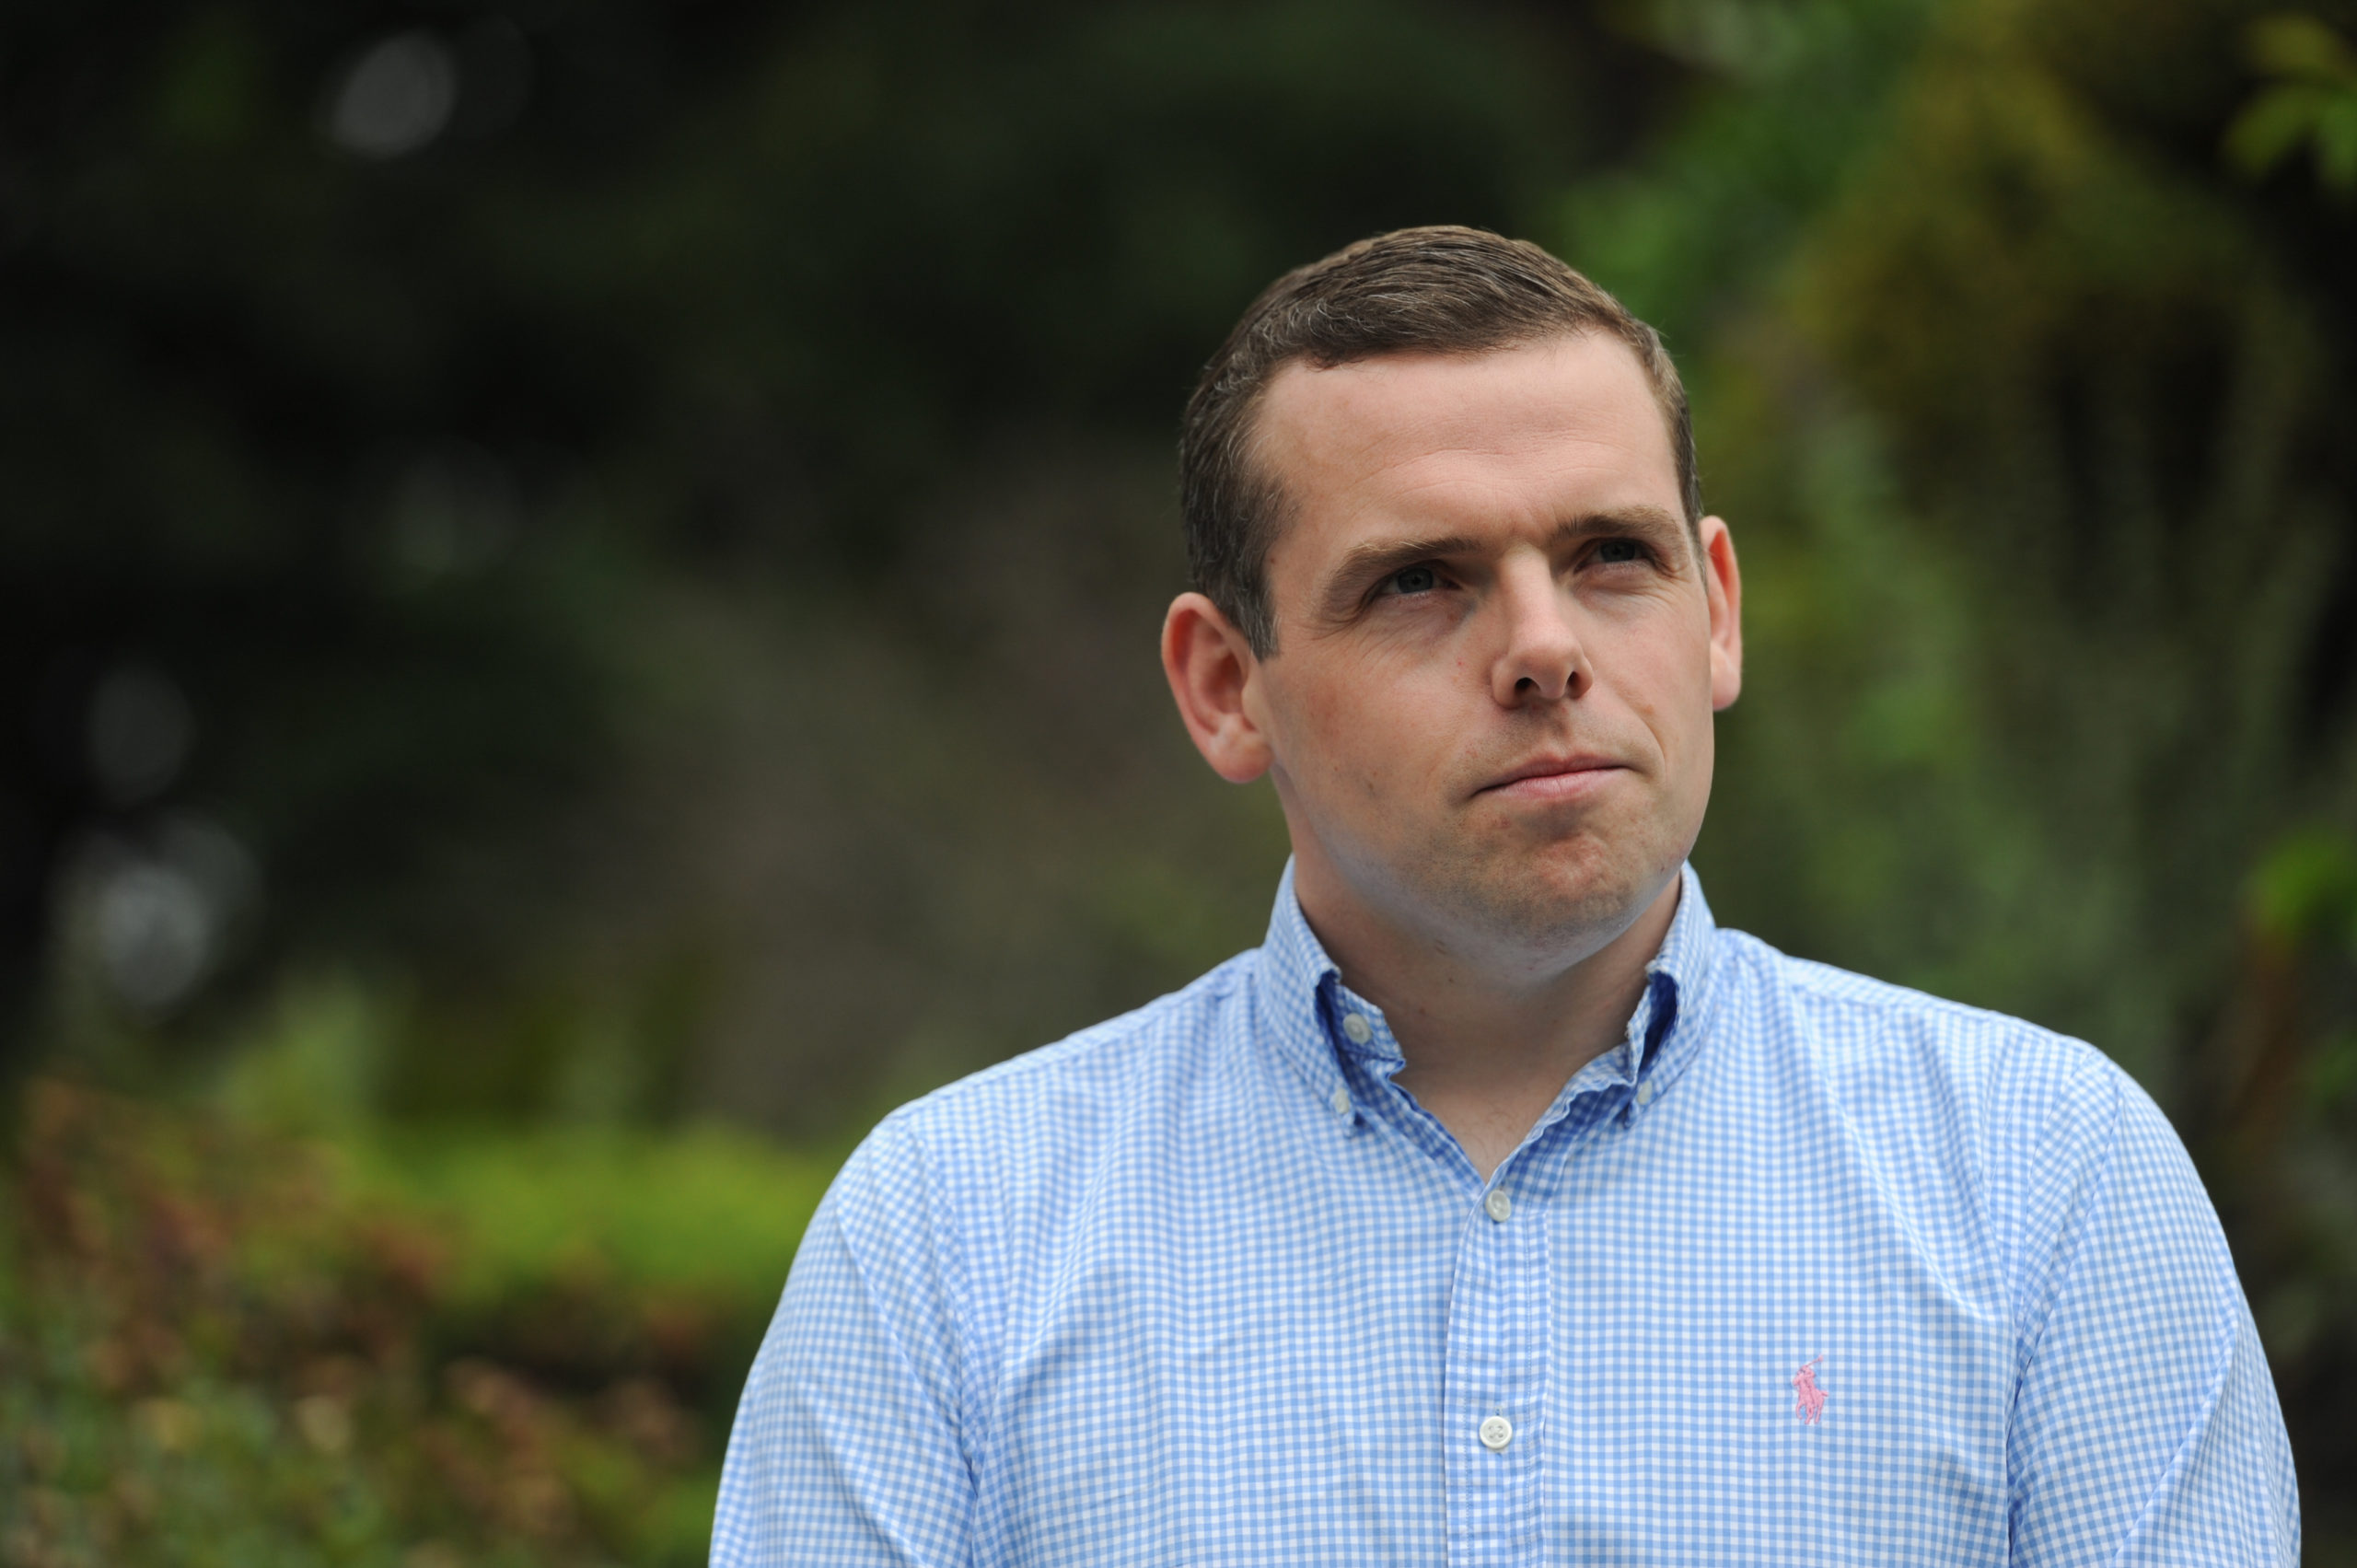 MP Douglas Ross is concerned about respite flat in Elgin